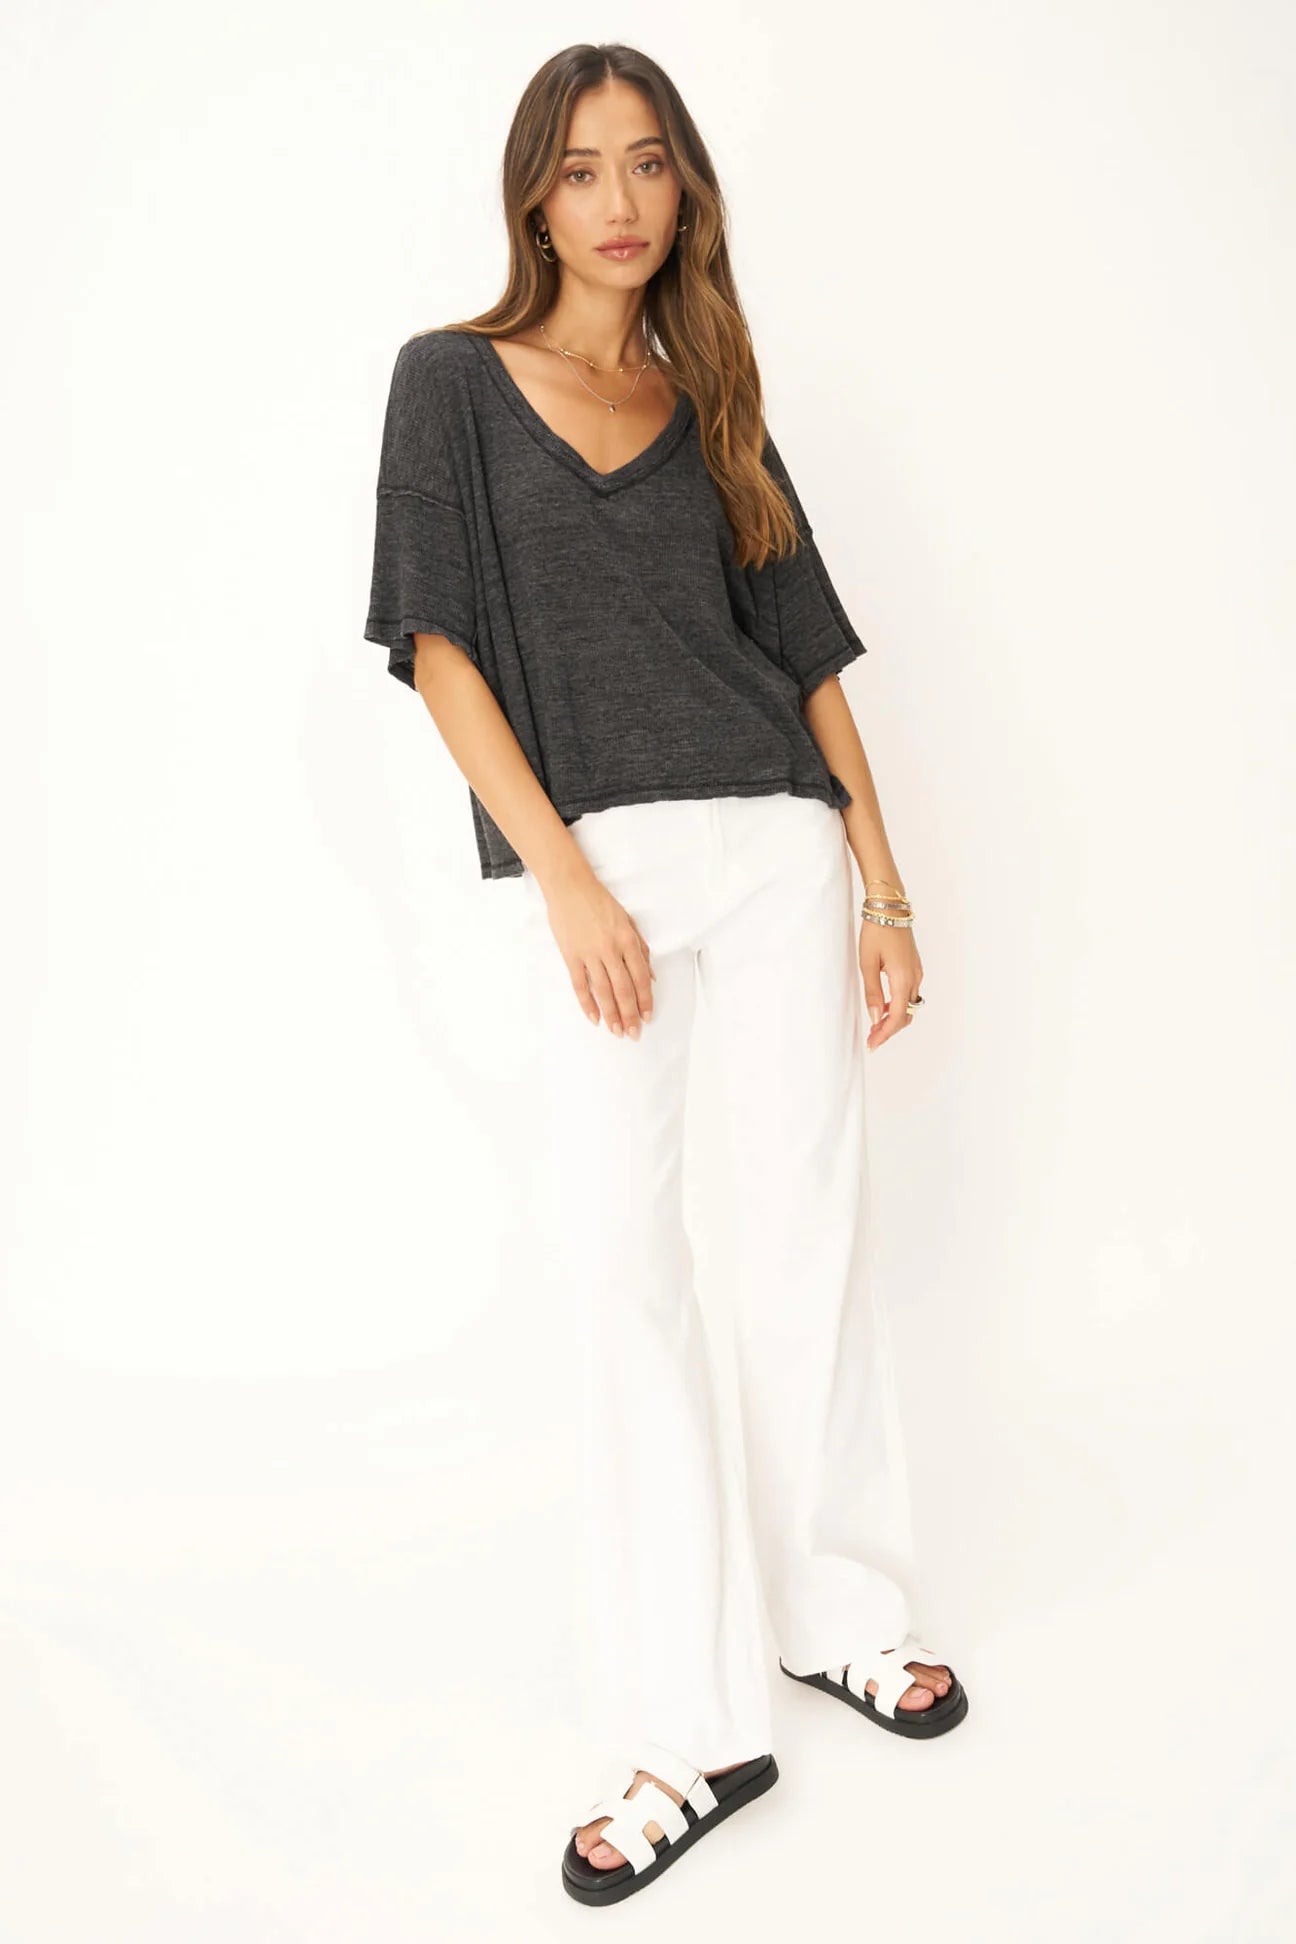 OH GIRL RAW V NECK TEXTURED TEE